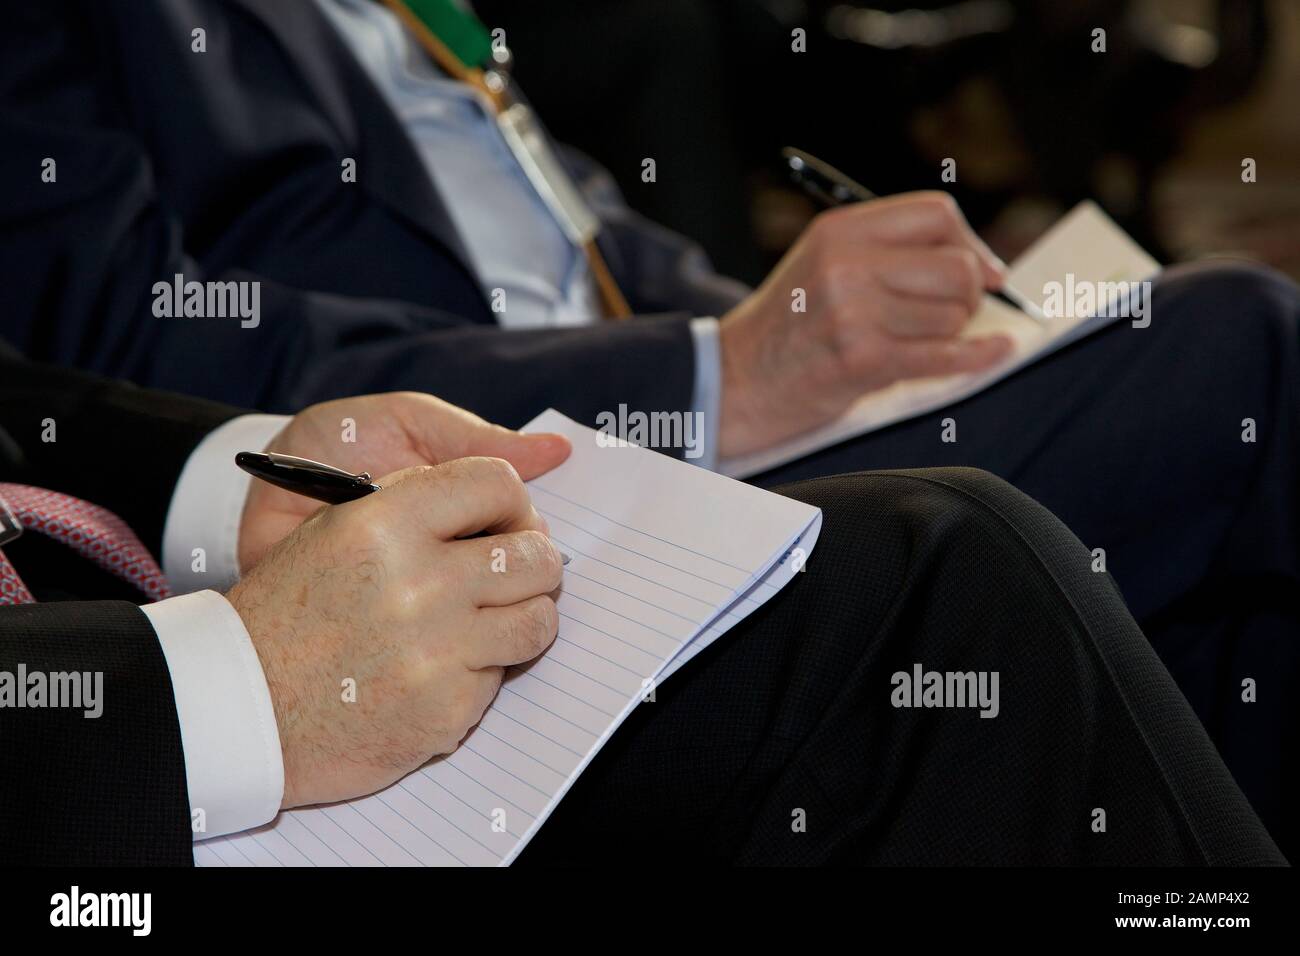 Taking notes at a business meeting or conference. Stock Photo